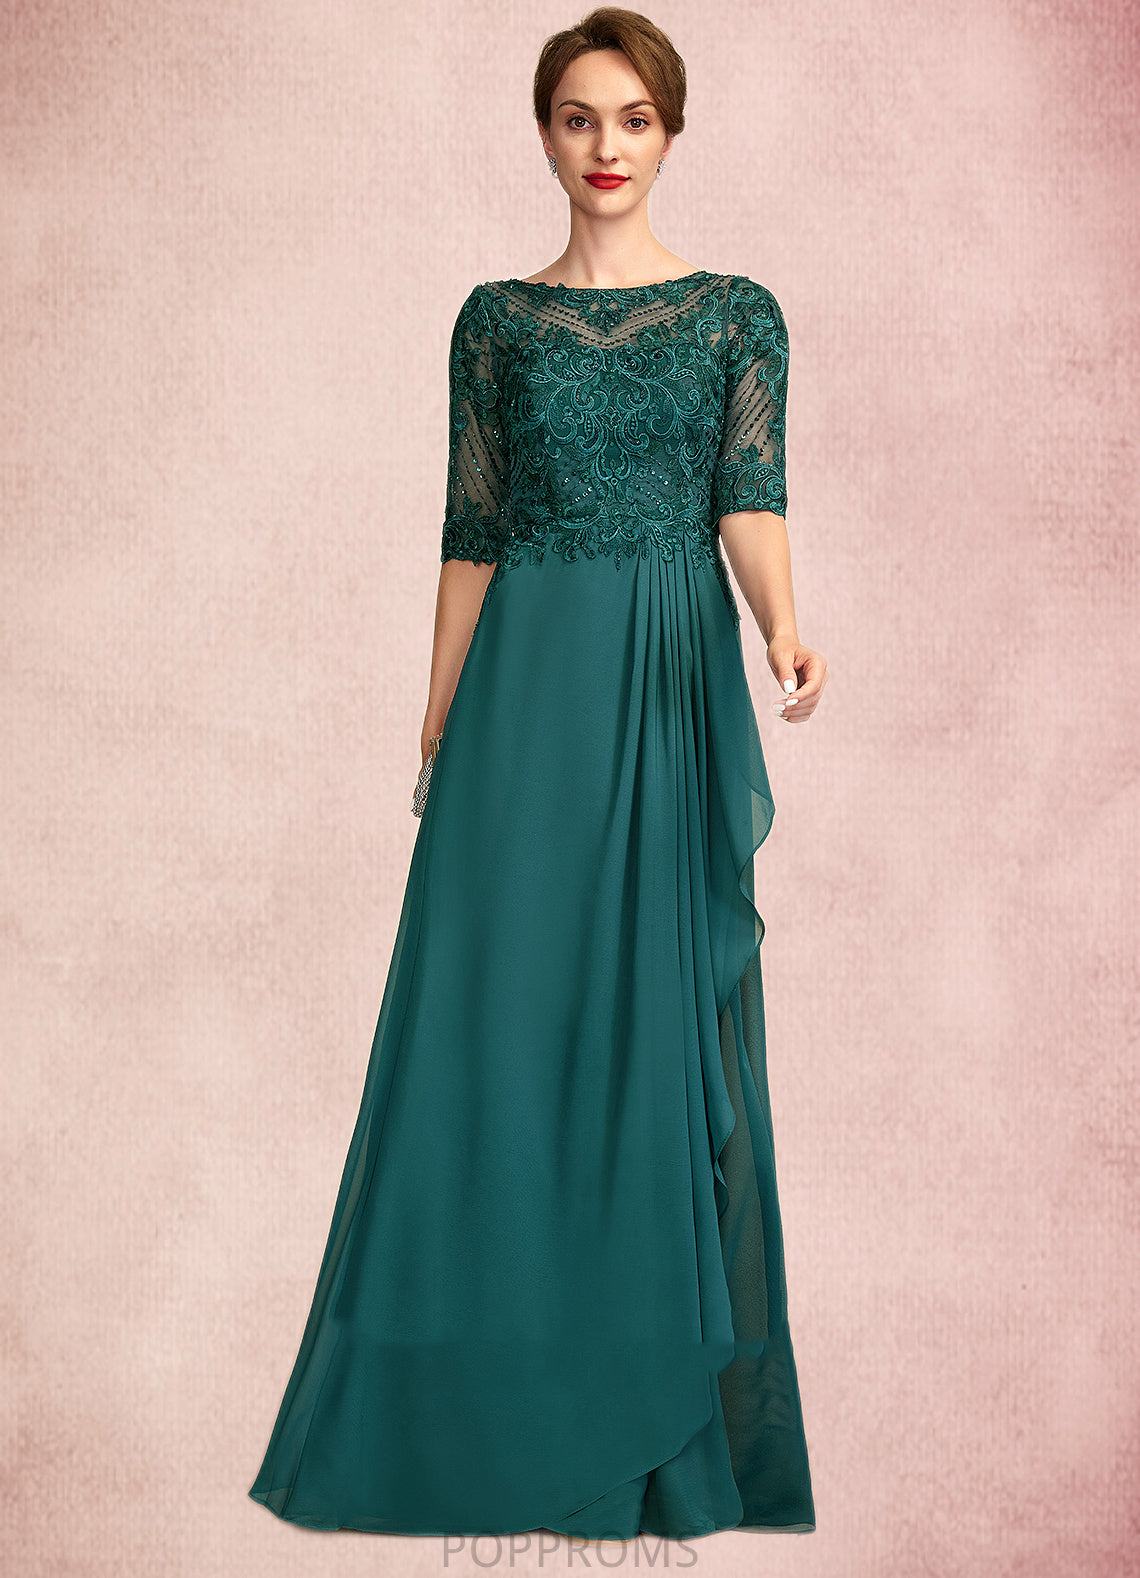 Lily A-Line Scoop Neck Floor-Length Chiffon Lace Mother of the Bride Dress With Beading Sequins Cascading Ruffles PP6126P0015027